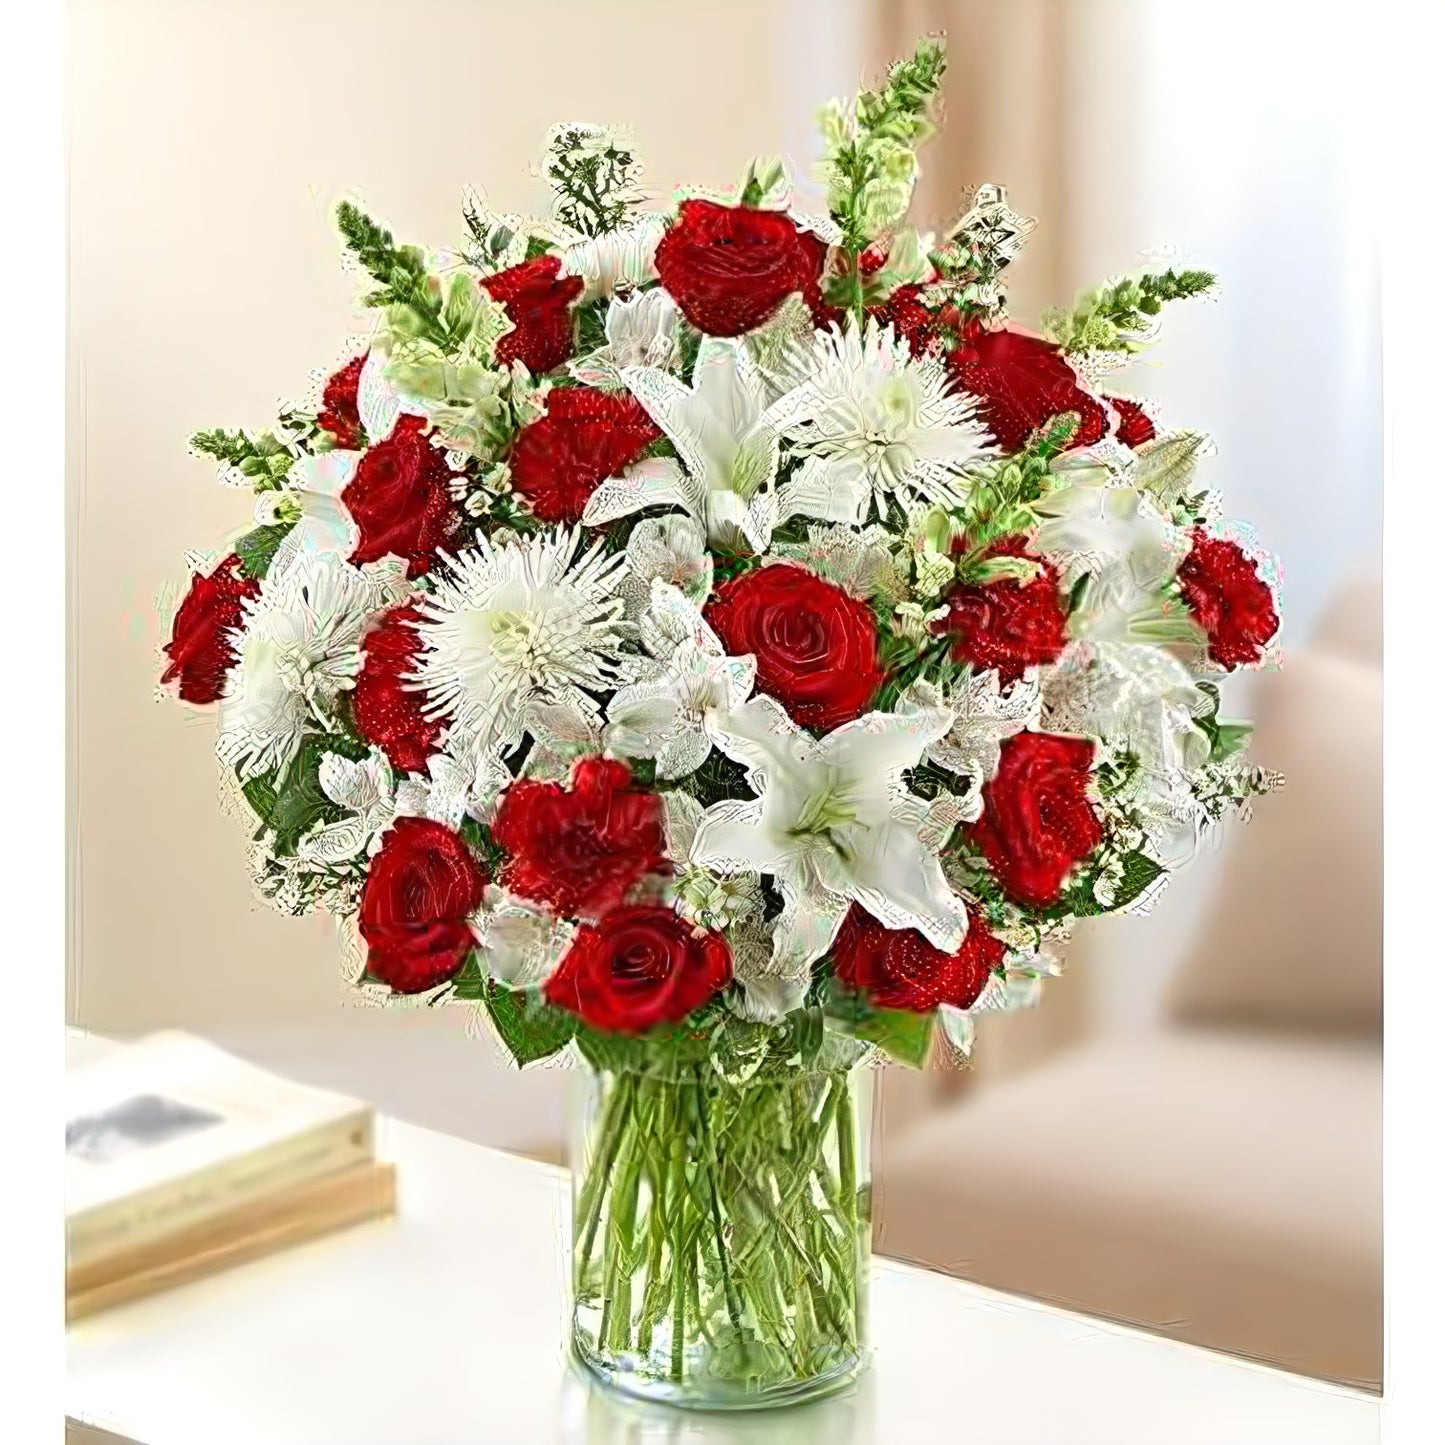 Sincerest Sorrow - Red and White - Funeral > Vase Arrangements - Queens Flower Delivery